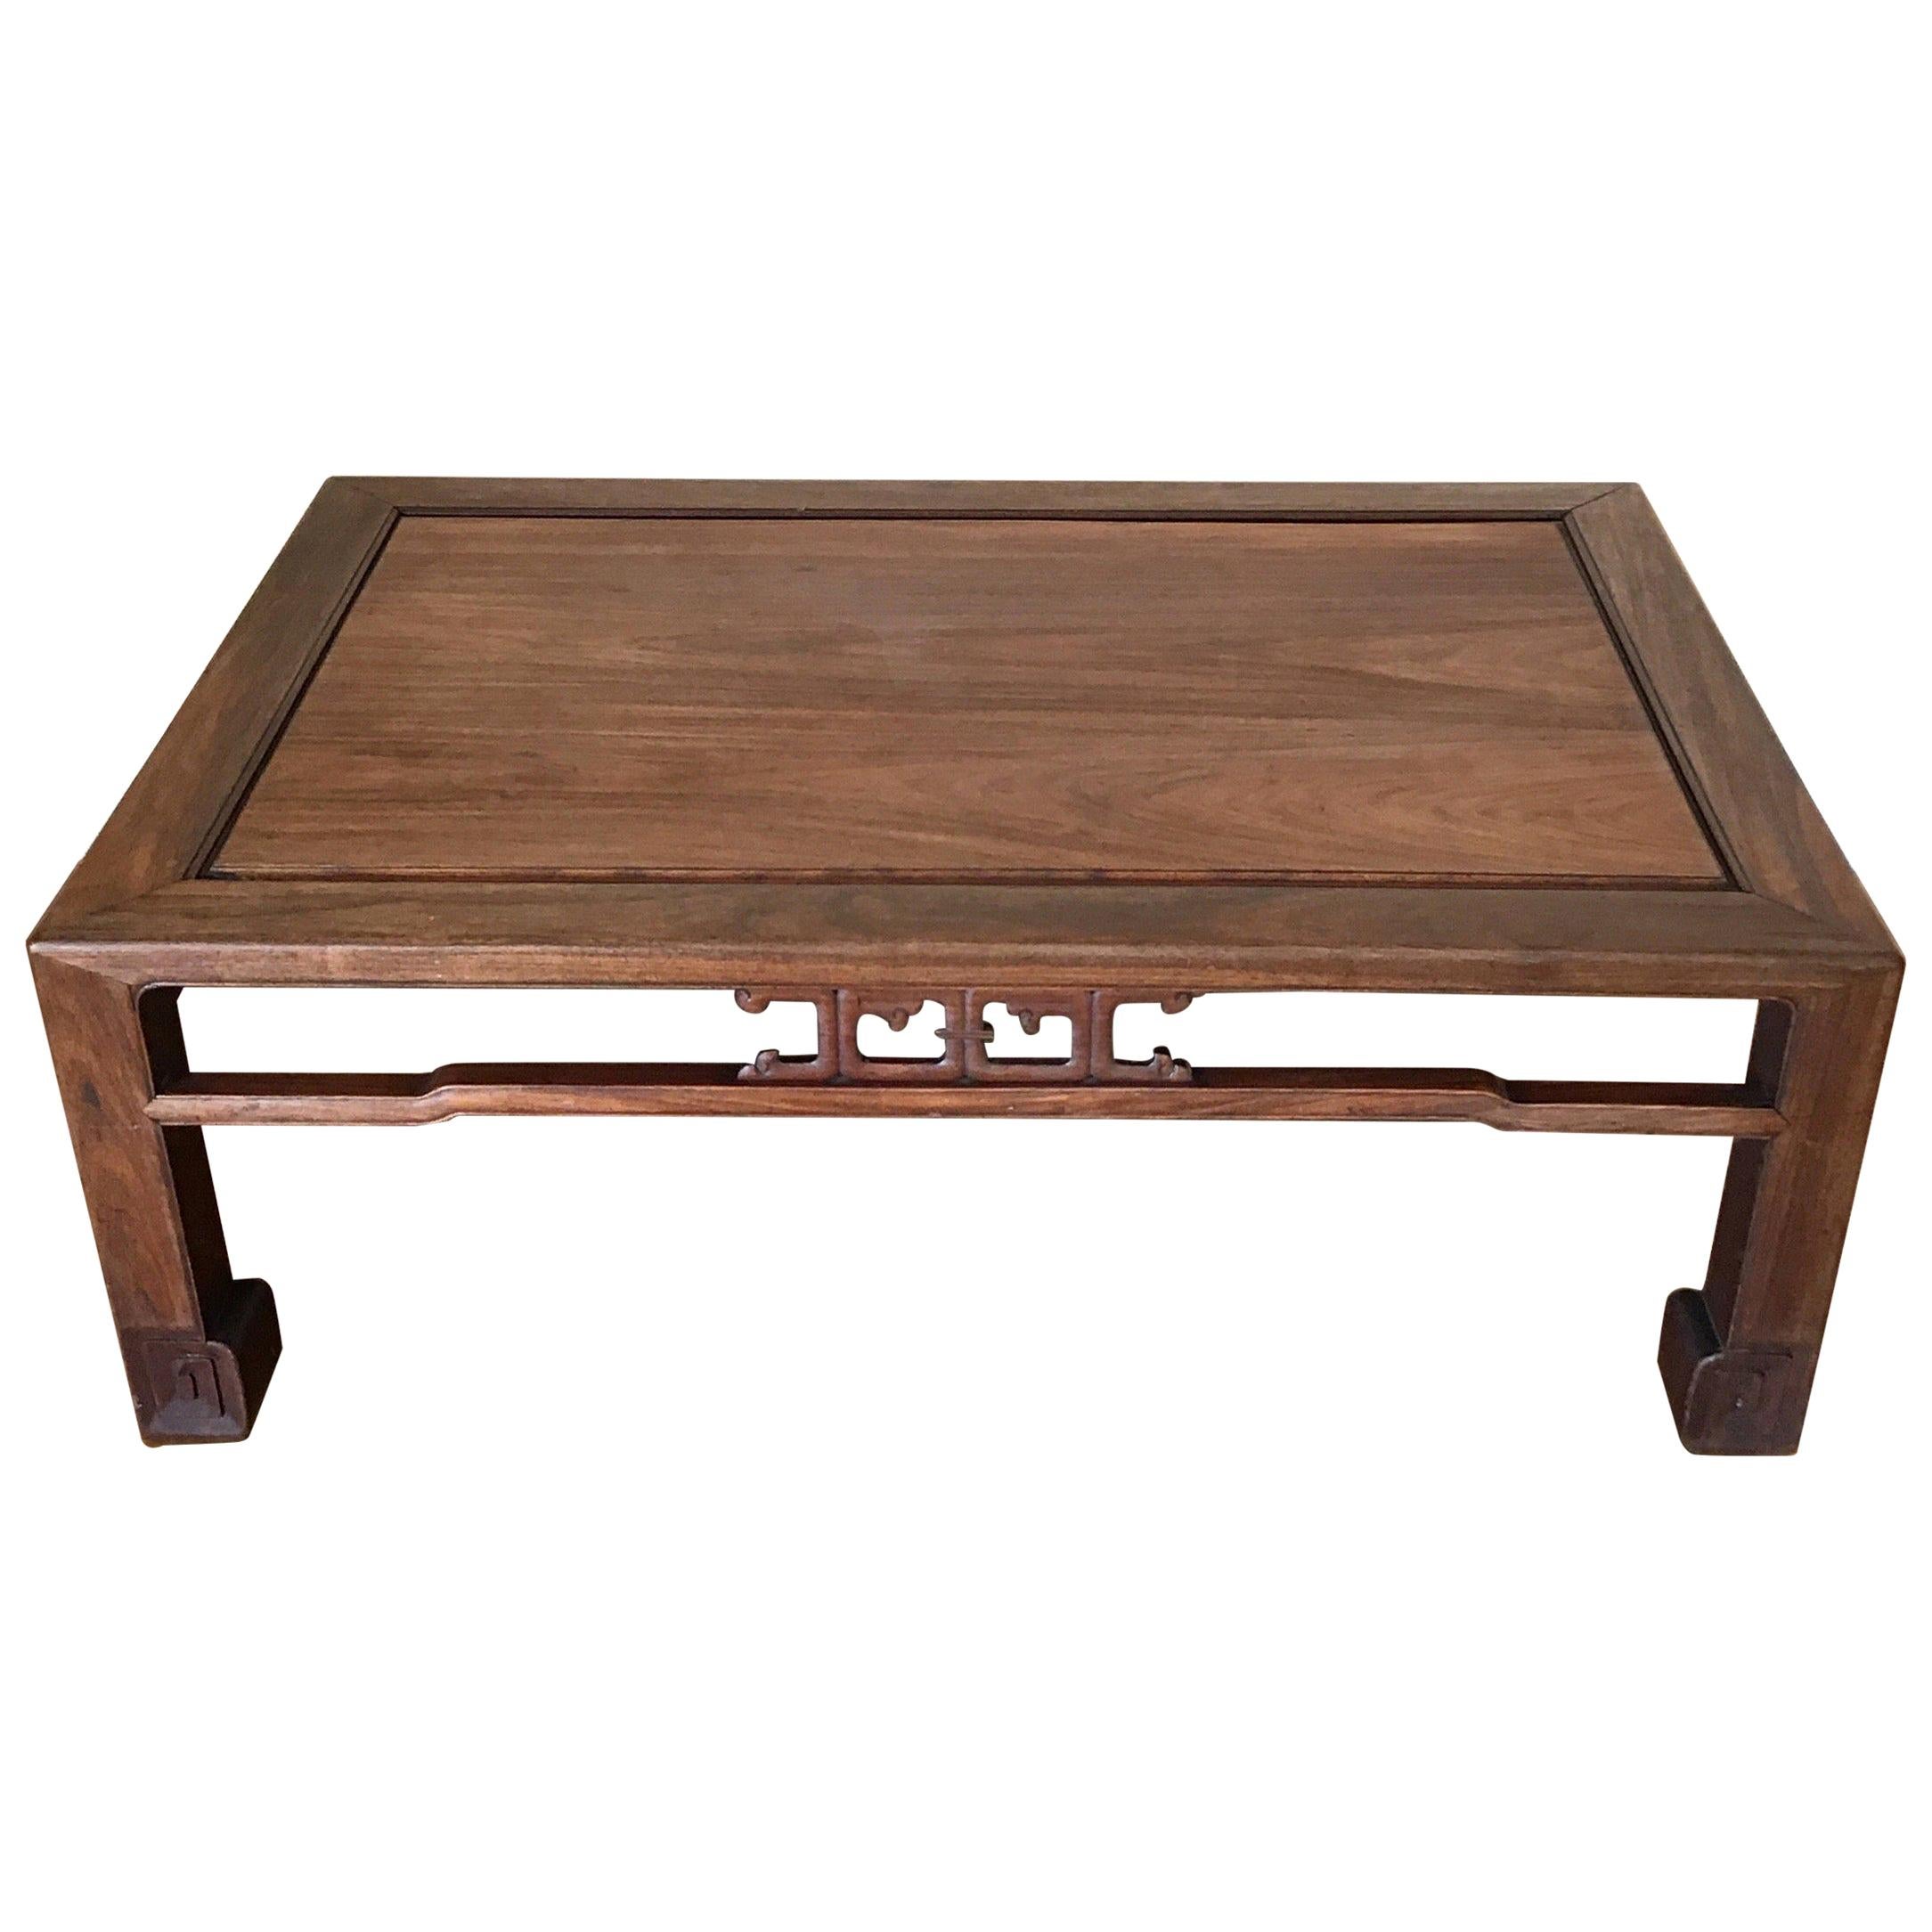 Japanese Mid-19th Century Coffee Table For Sale